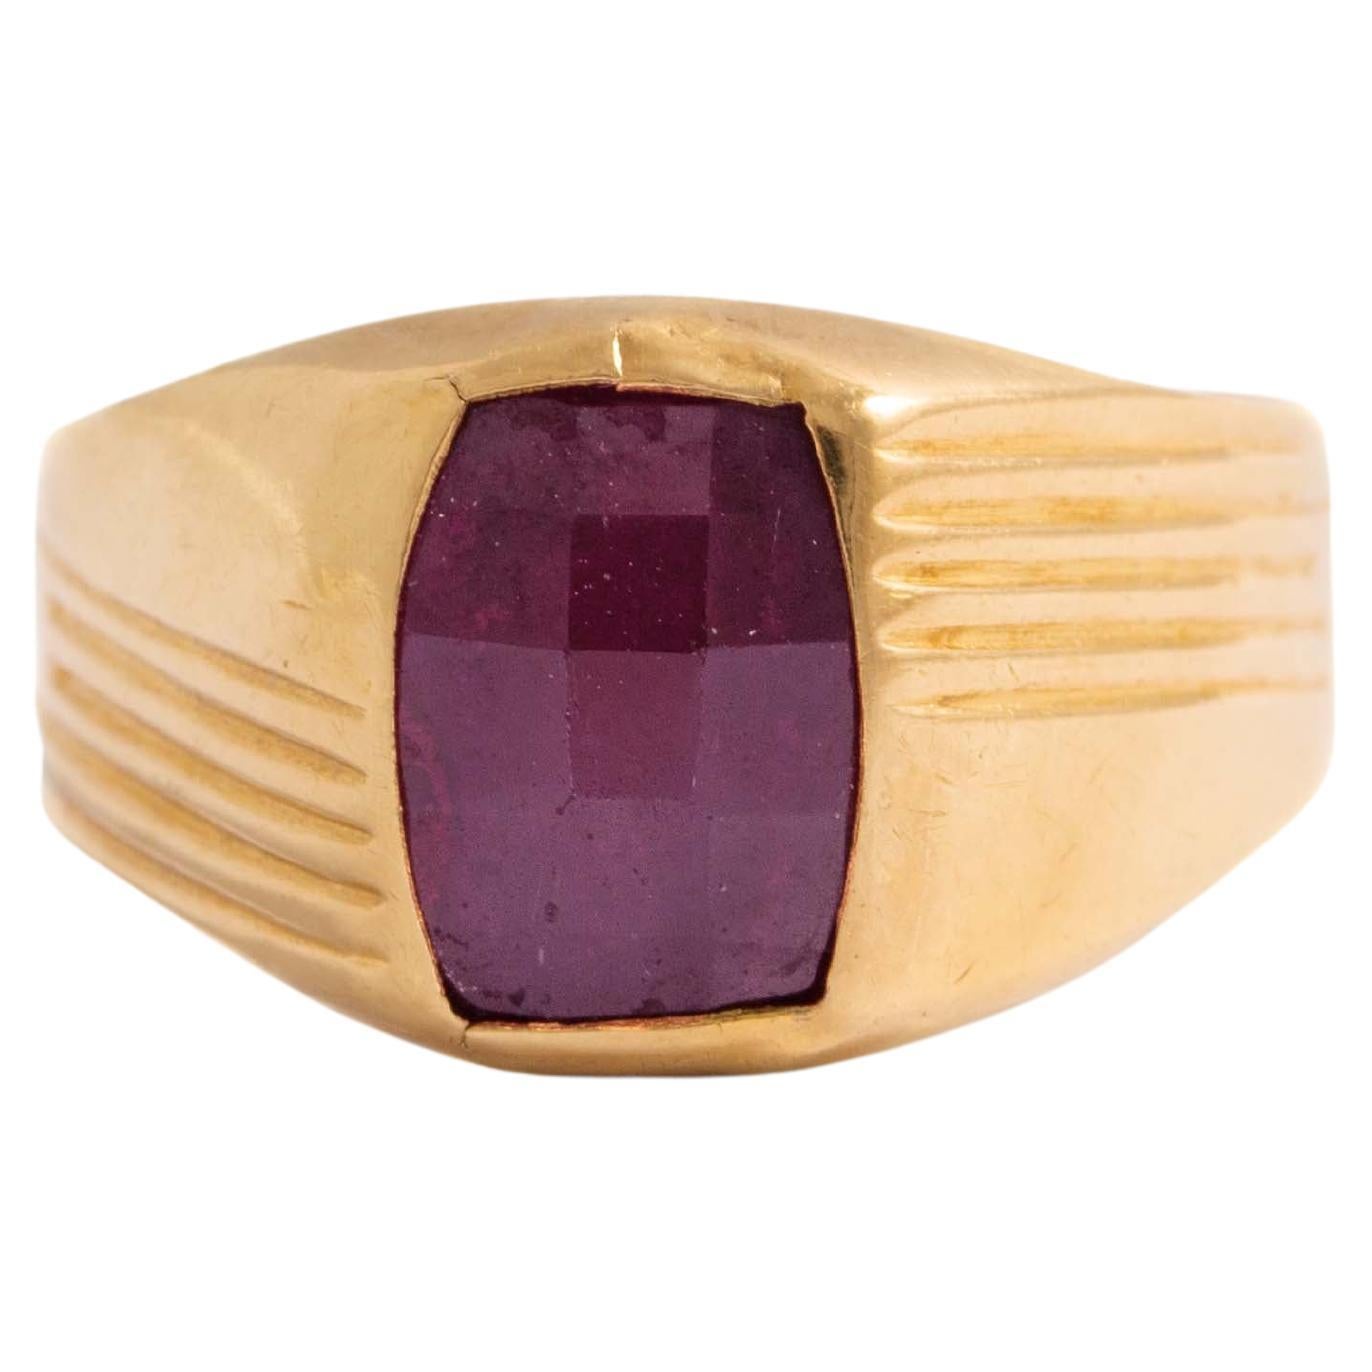 18K yellow gold ring centered by a red stone.
Size: 59. 
Gross weight: 3.77 grams.